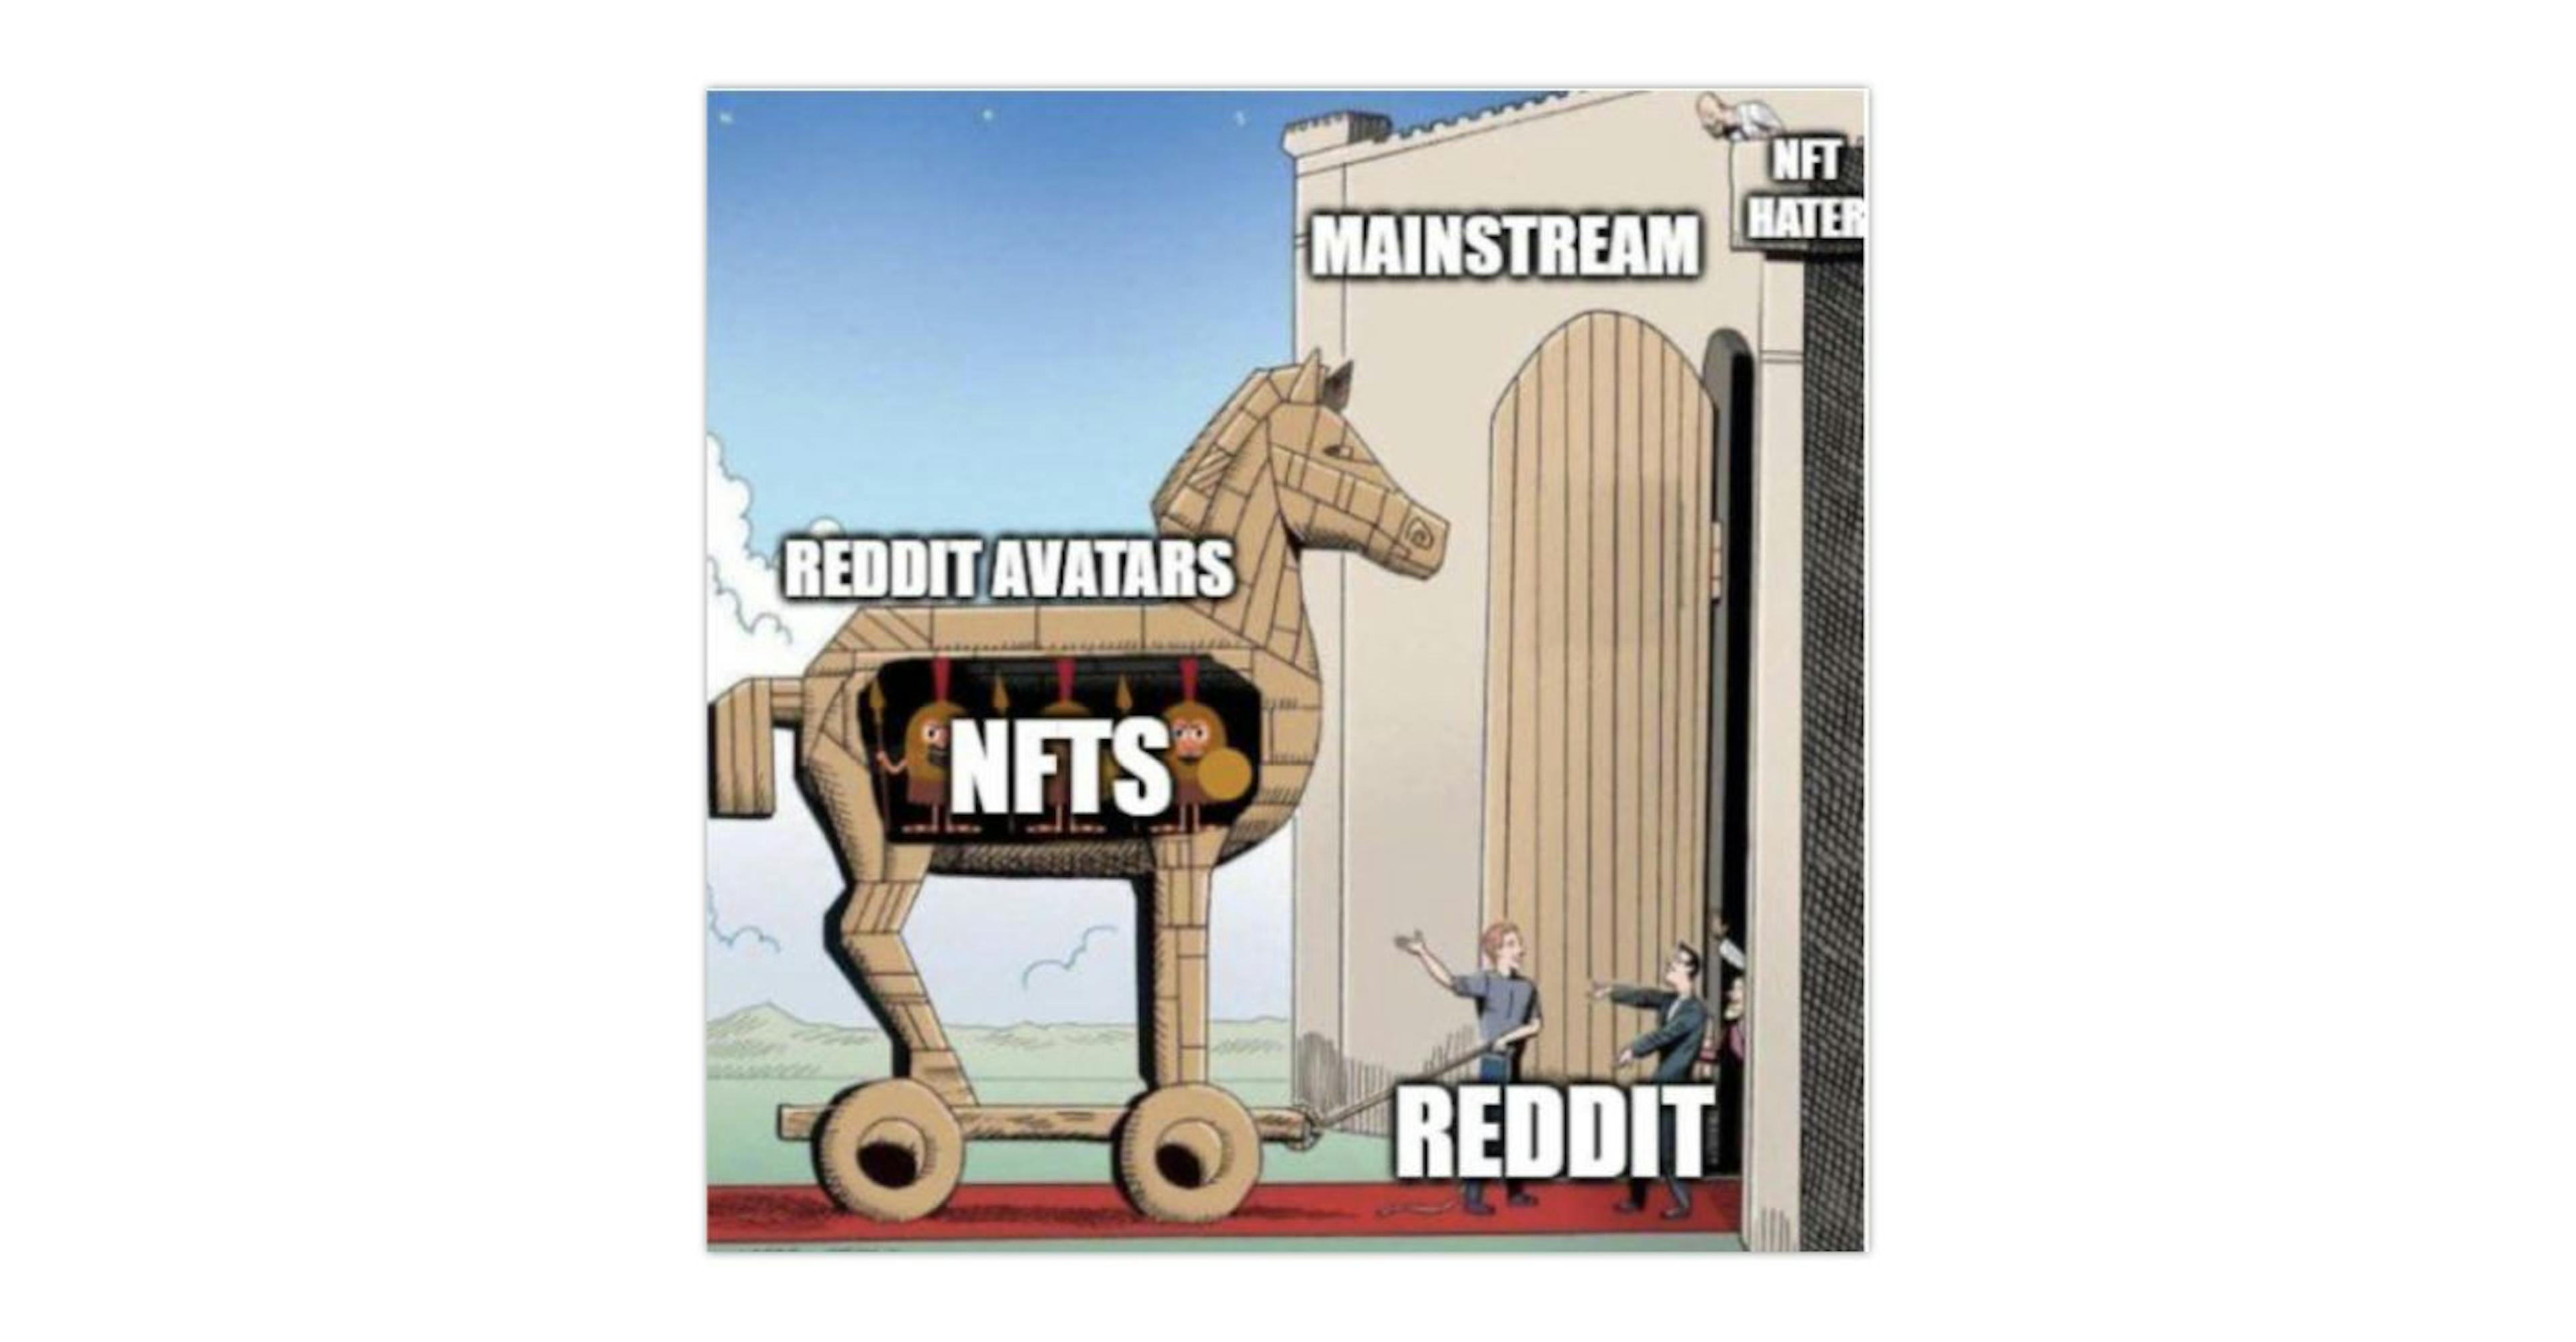 featured image - How to Get 3M People to Own NFTs Without Them Knowing